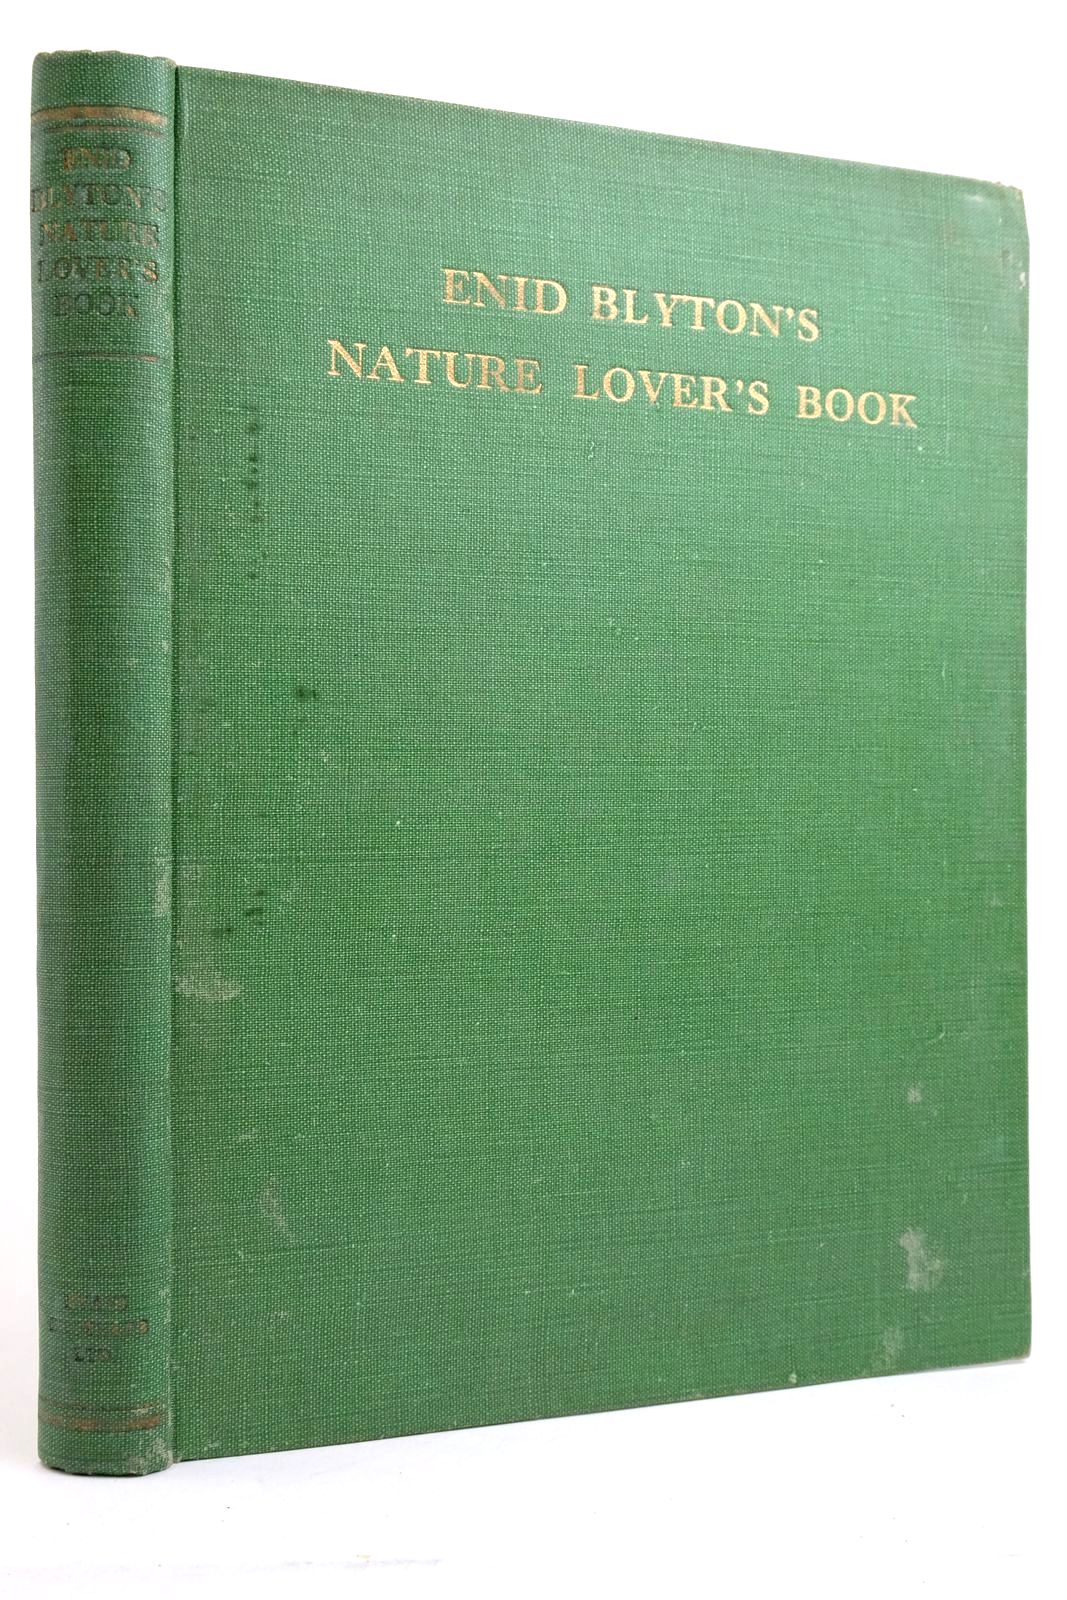 Photo of ENID BLYTON'S NATURE LOVER'S BOOK written by Blyton, Enid illustrated by Hopking, Noel published by Evans Brothers Limited (STOCK CODE: 2135627)  for sale by Stella & Rose's Books